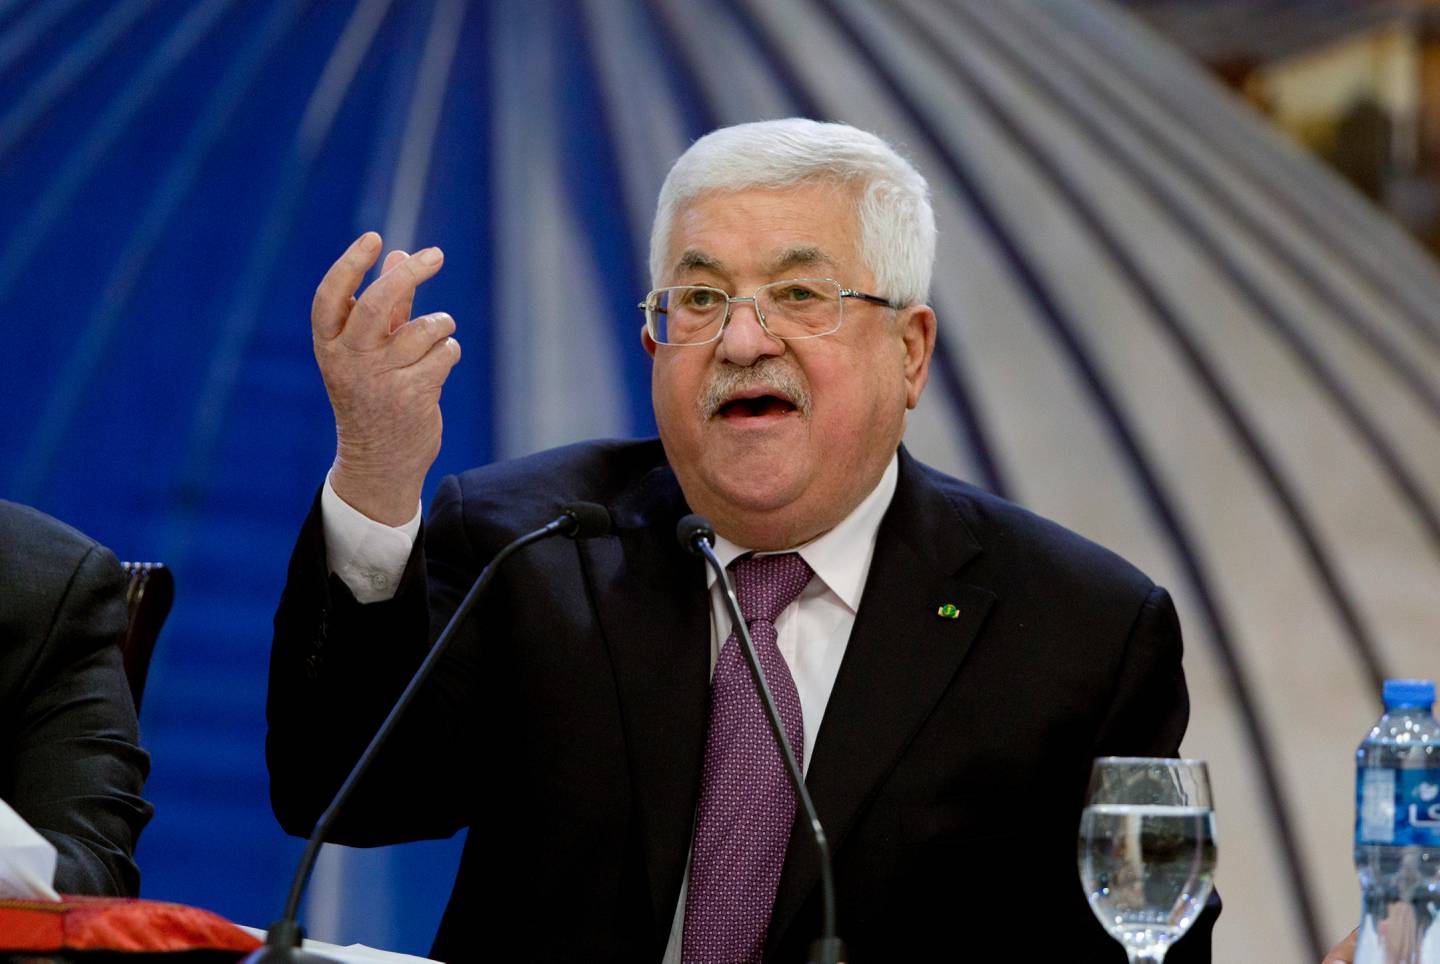 FILE - In this Jan. 22, 2020 file photo, Palestinian President Mahmoud Abbas speaks after a meeting of the Palestinian leadership in the West Bank city of Ramallah. A senior Palestinian official said Tuesday, Nov. 17 the Palestinian Authority will restore ties with Israel after it cut all contacts in May over Israels planned annexation of up to a third of the occupied West Bank. The move to restore ties likely reflects the Palestinians hopes that the election of former Vice President Joe Biden spells the end of the Trump administrations Mideast policies, which overwhelmingly favored Israel.  (AP Photo/Majdi Mohammed, File)